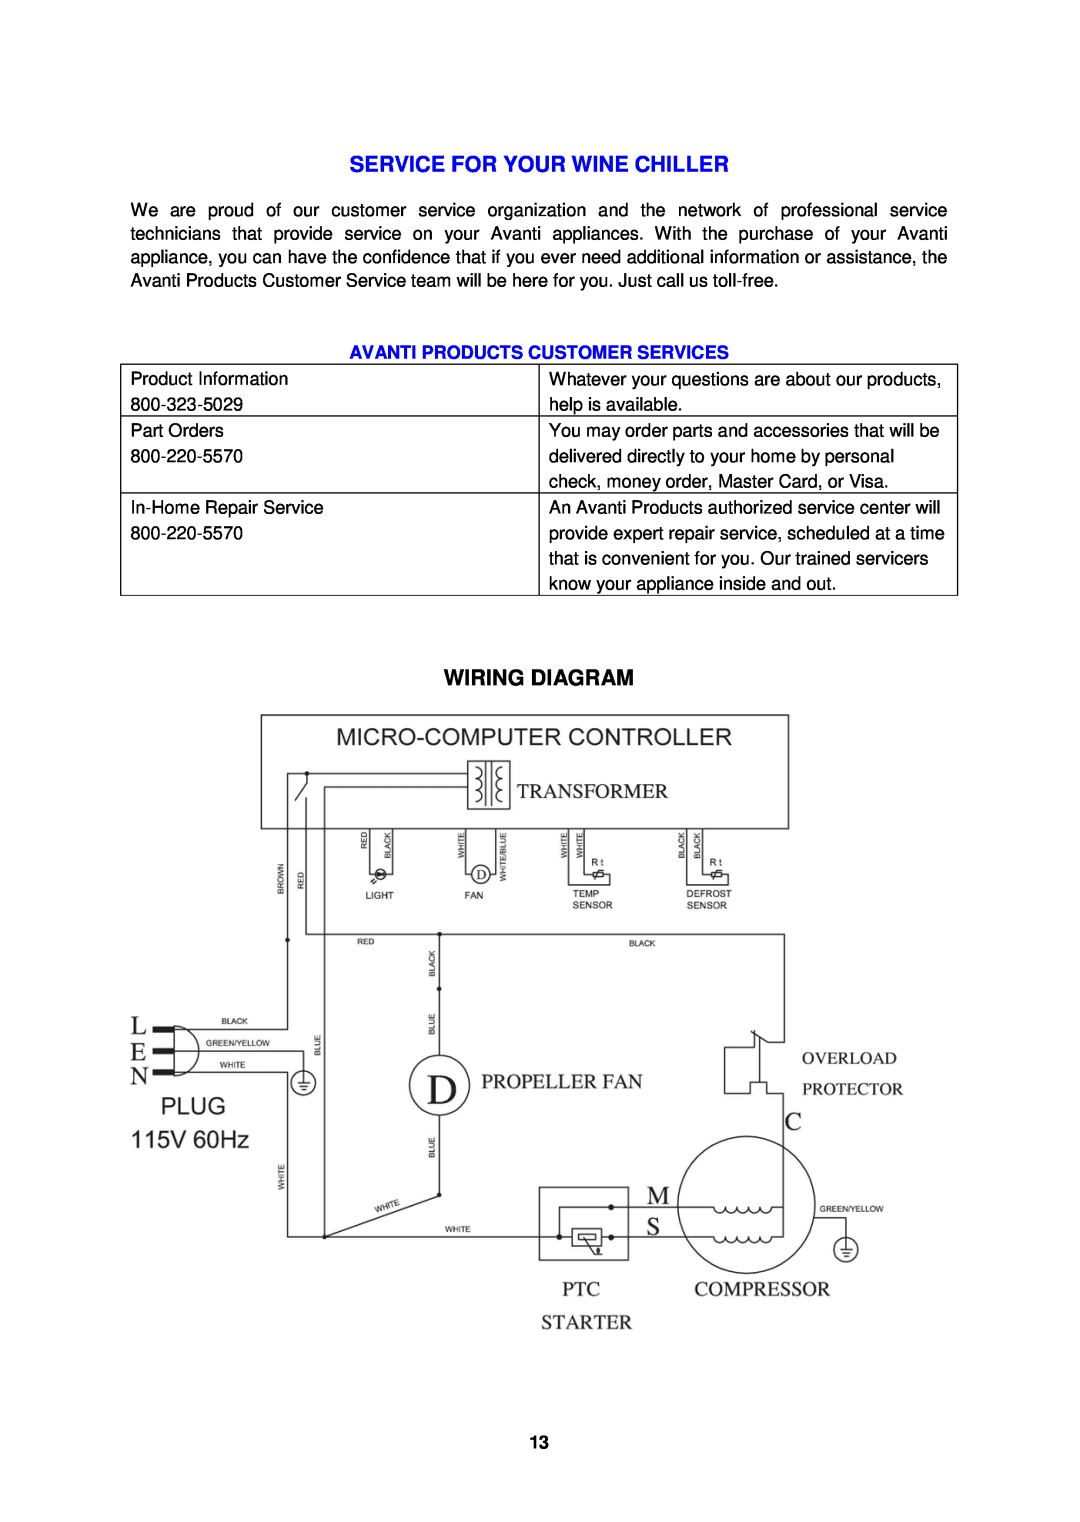 Avanti WCR8500SDZ instruction manual Service For Your Wine Chiller, Wiring Diagram, Avanti Products Customer Services 